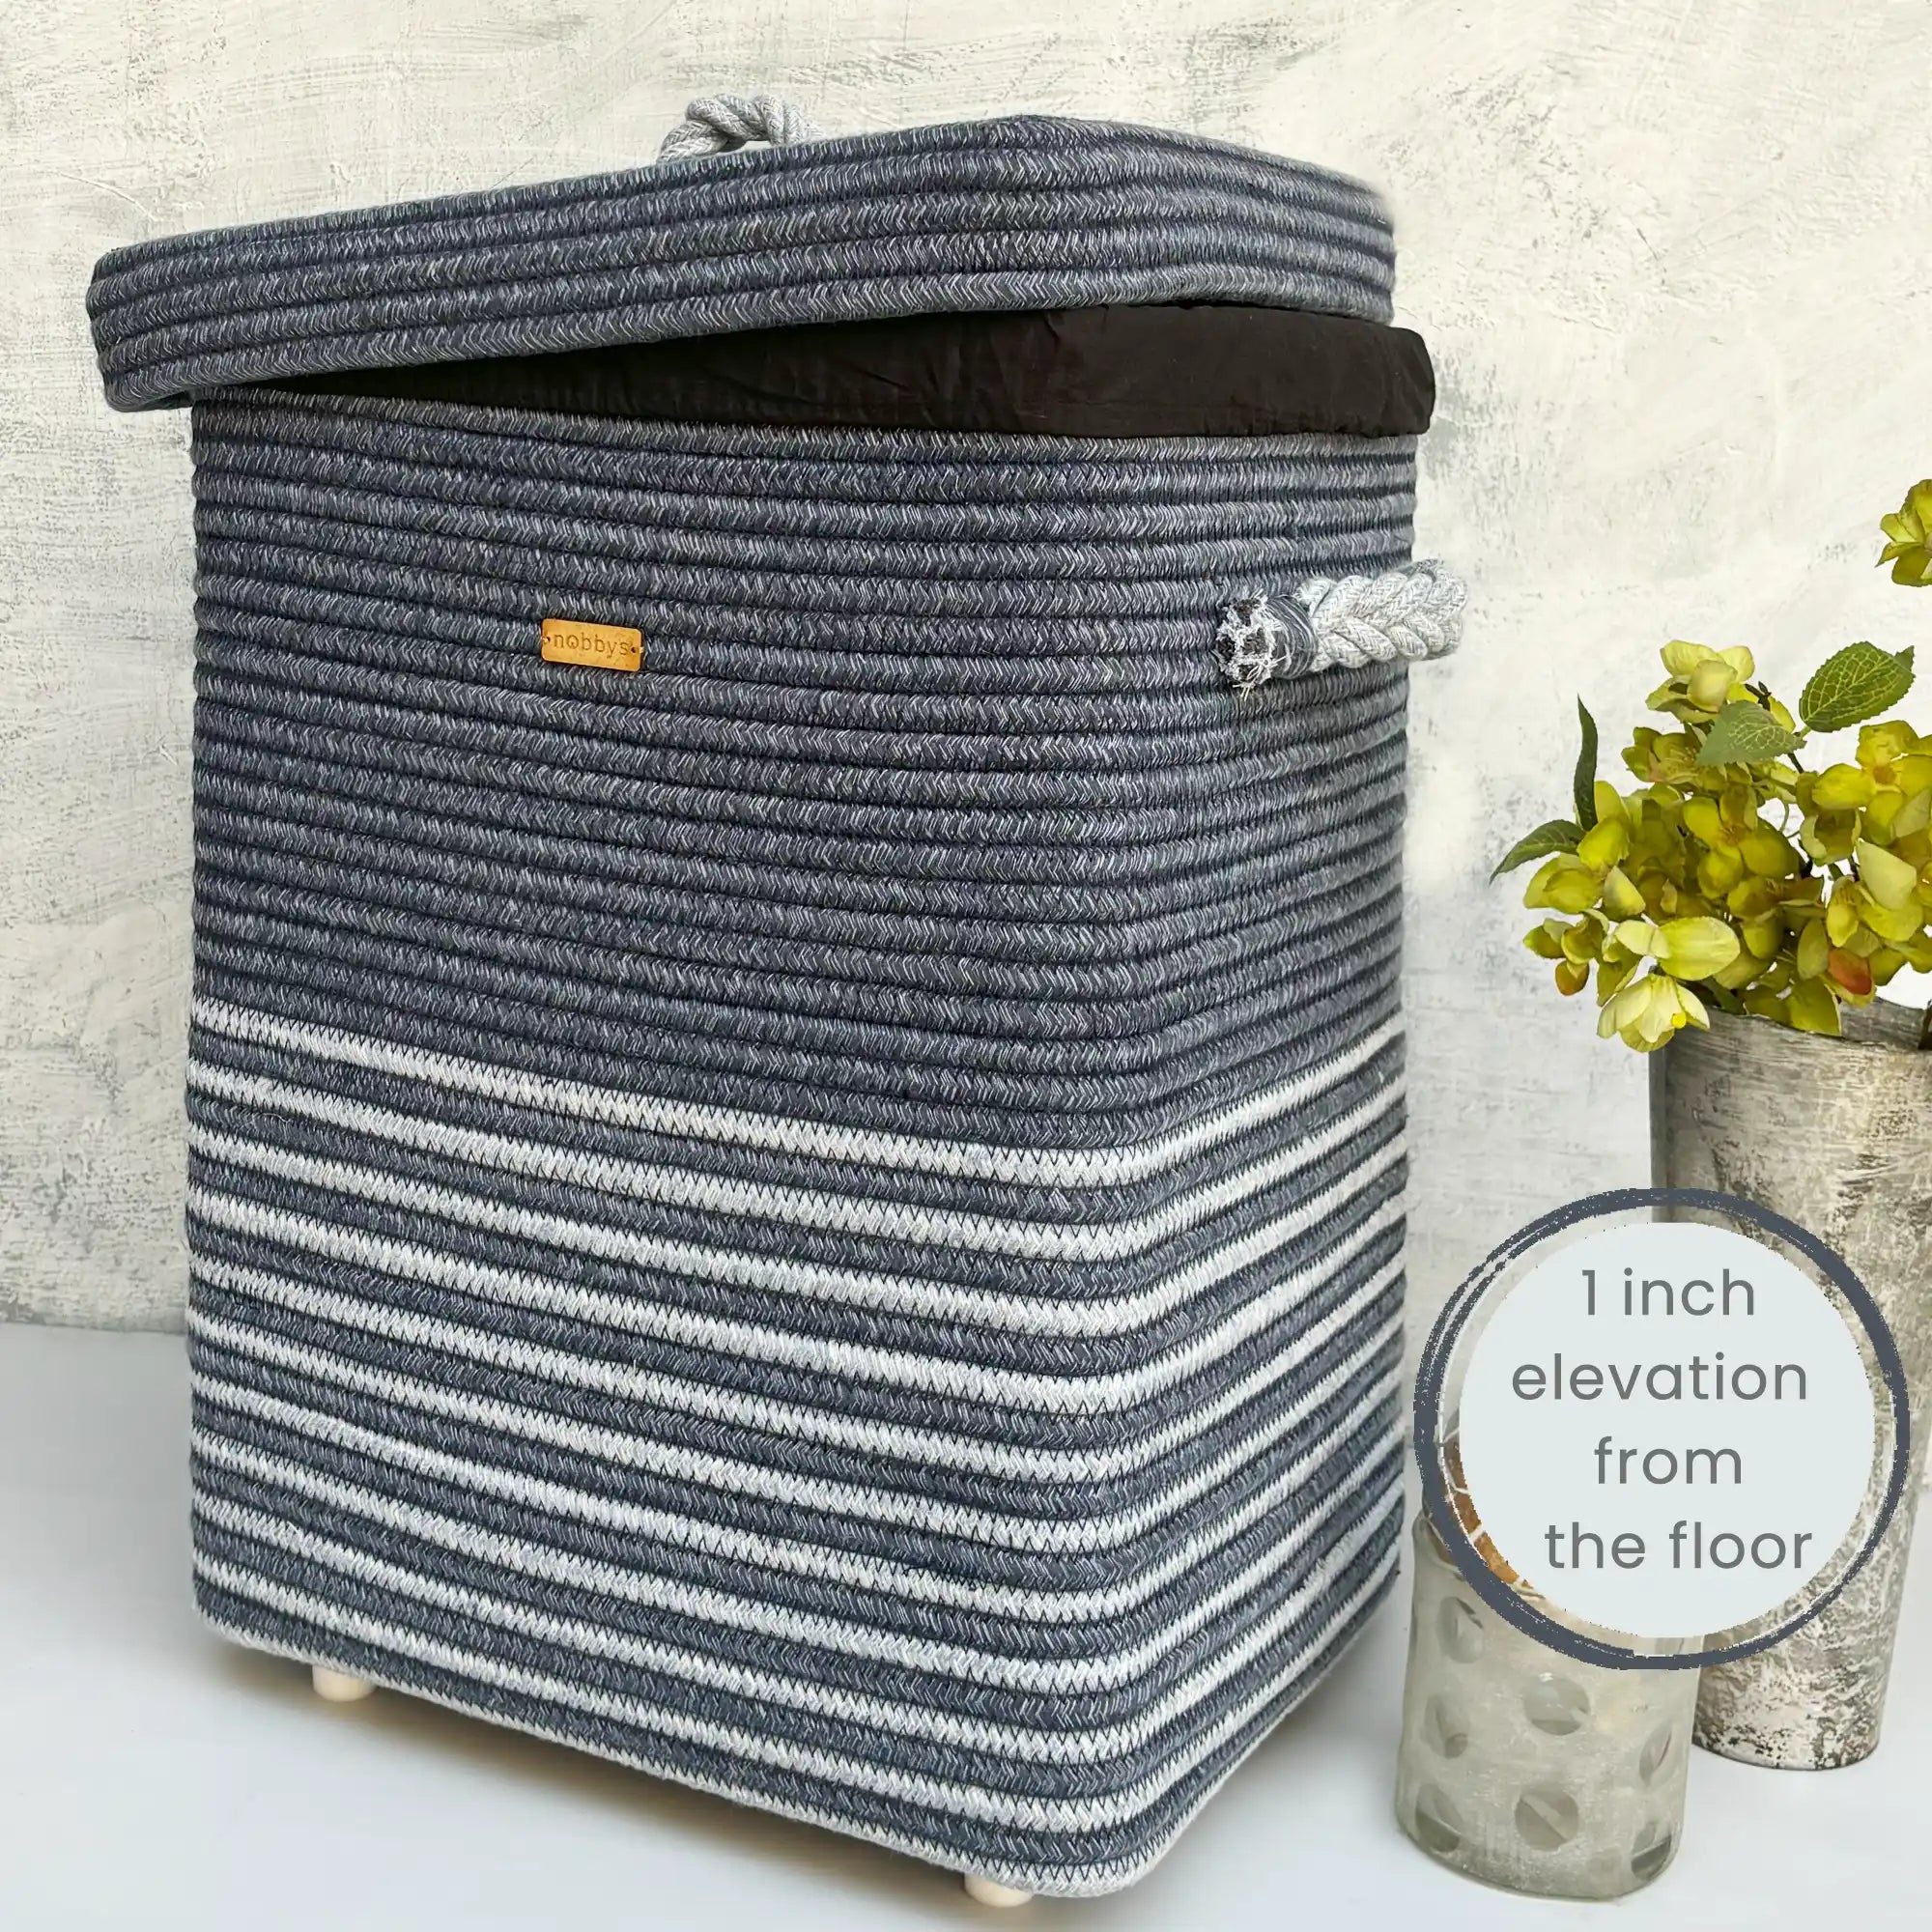 laundry basket with spacers